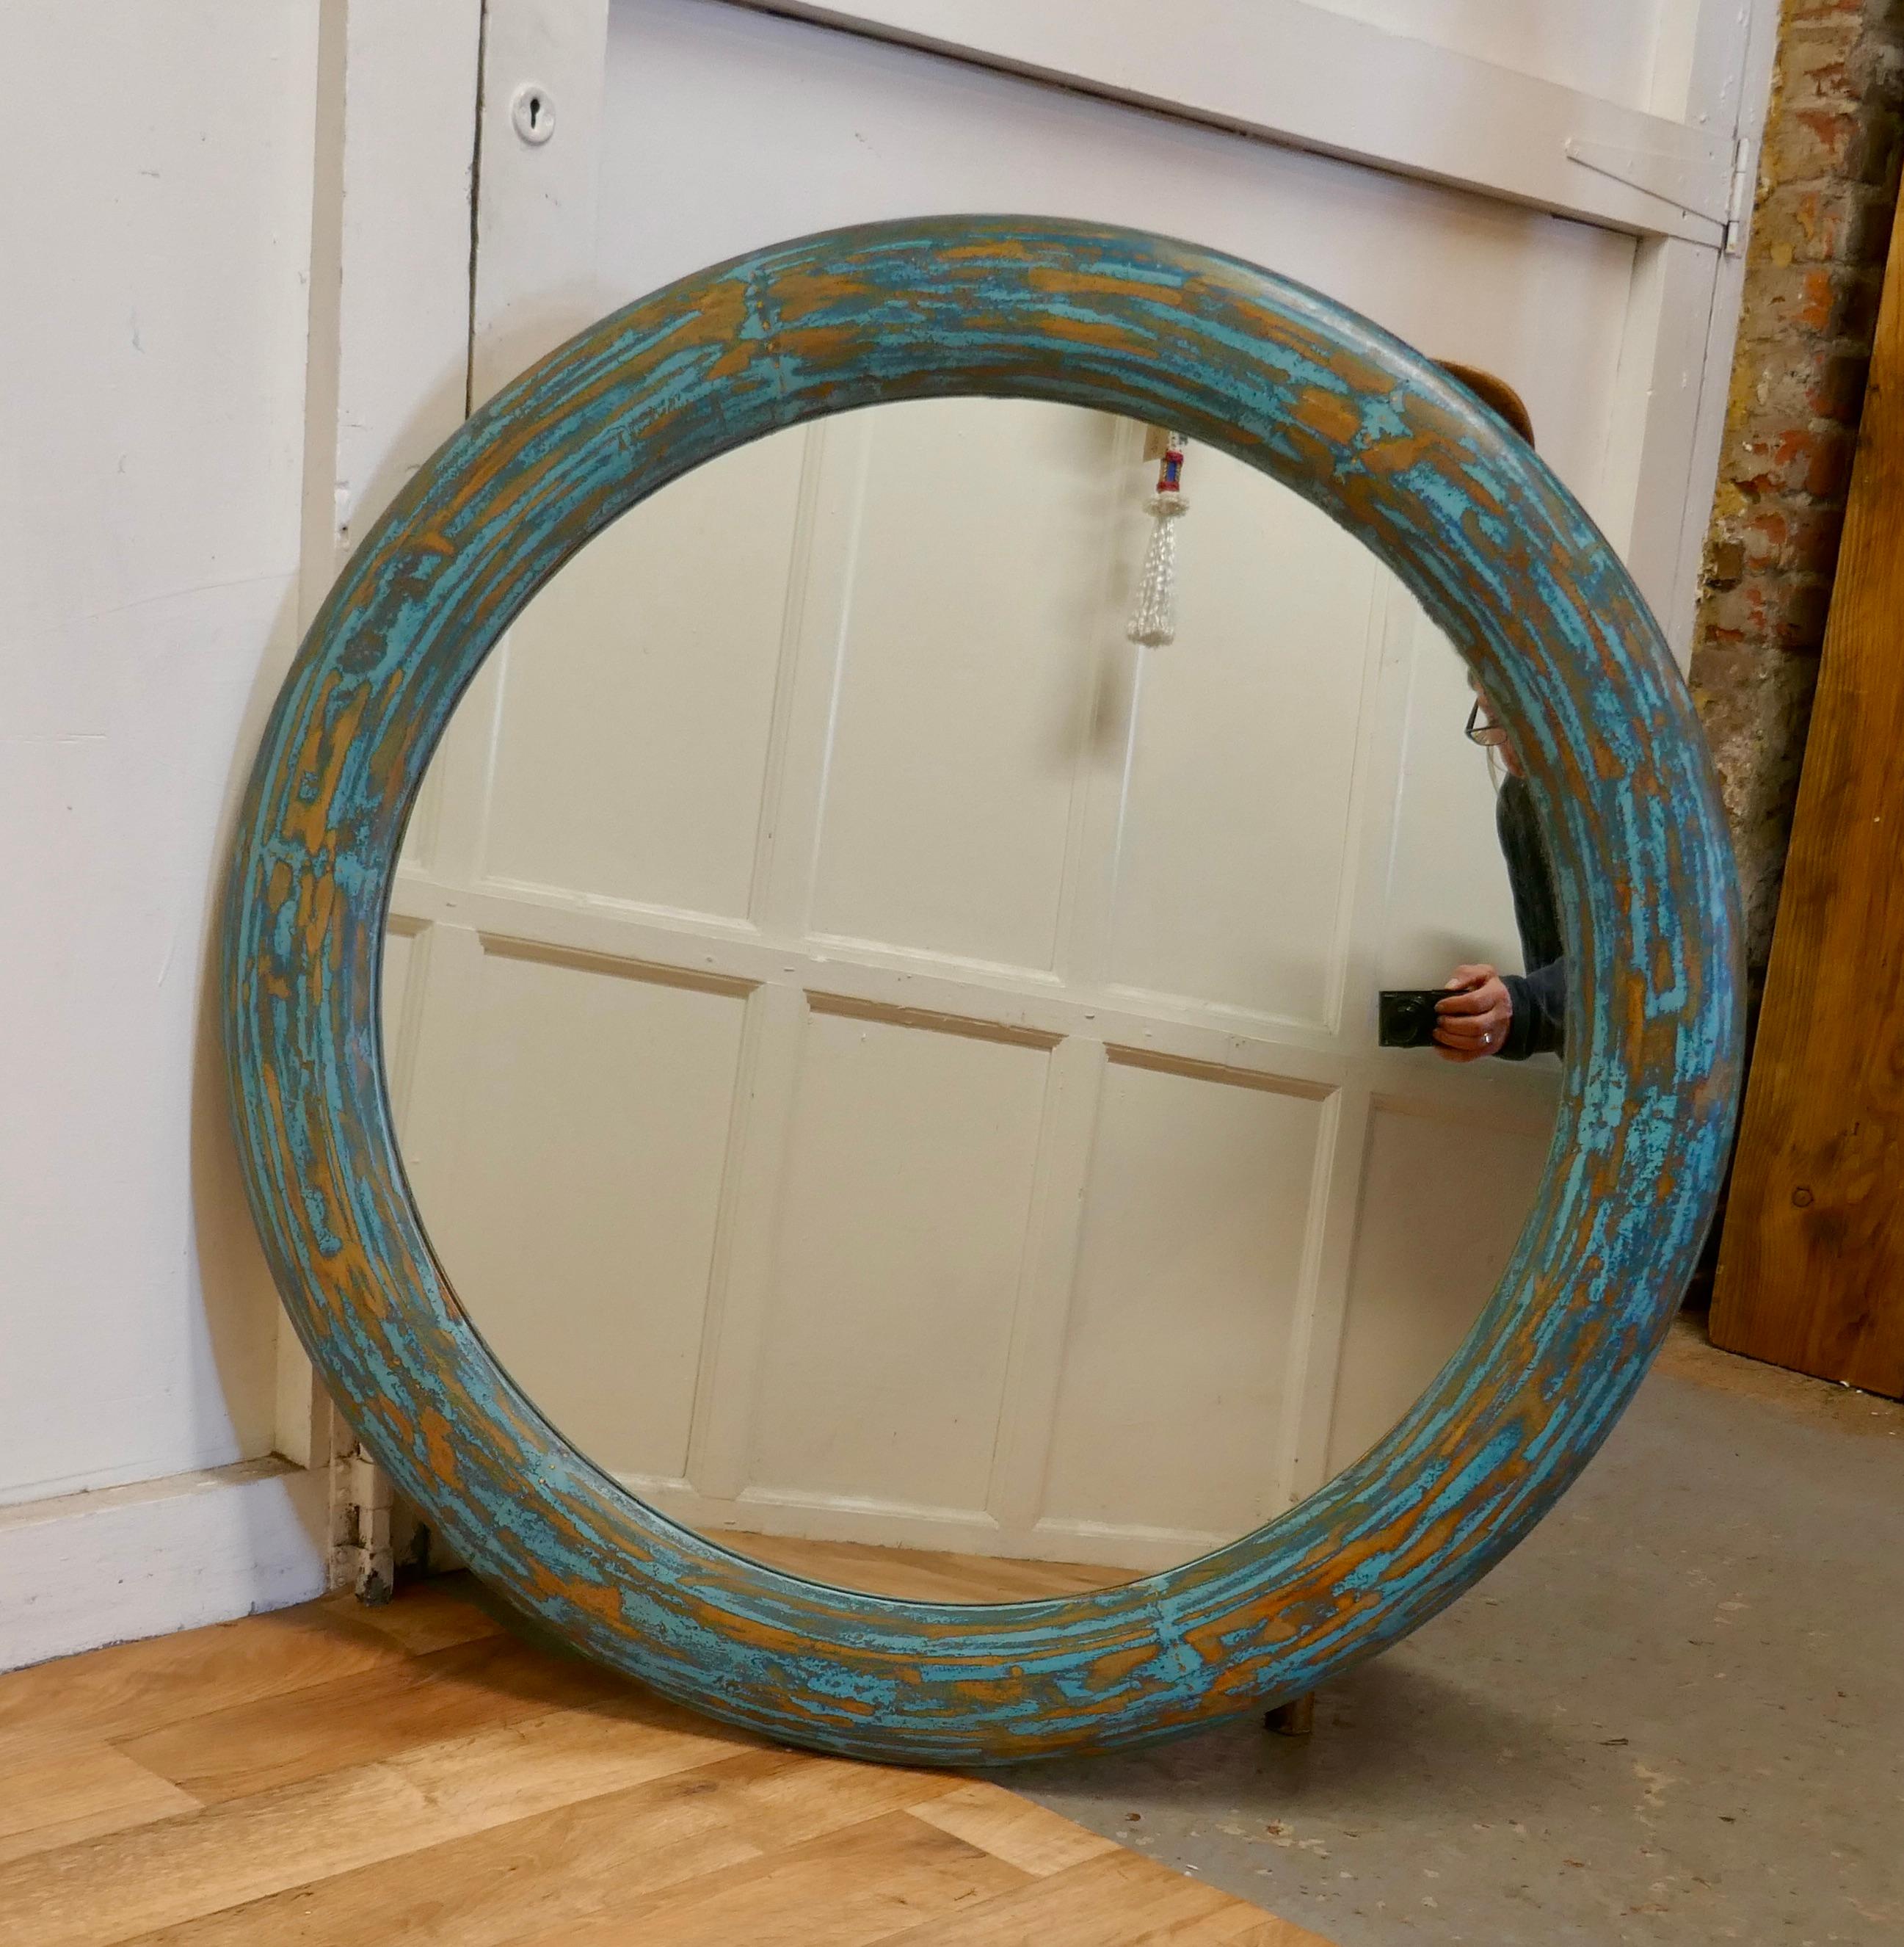 Large Round Painted Wall Mirror

This is a wonderful piece, the round mirror is set in a 4” wide D shaped Frame which has shabby blue painted finish.
The frame has a modern shabby look and the mirror glass is new

The mirror frame is 36” in